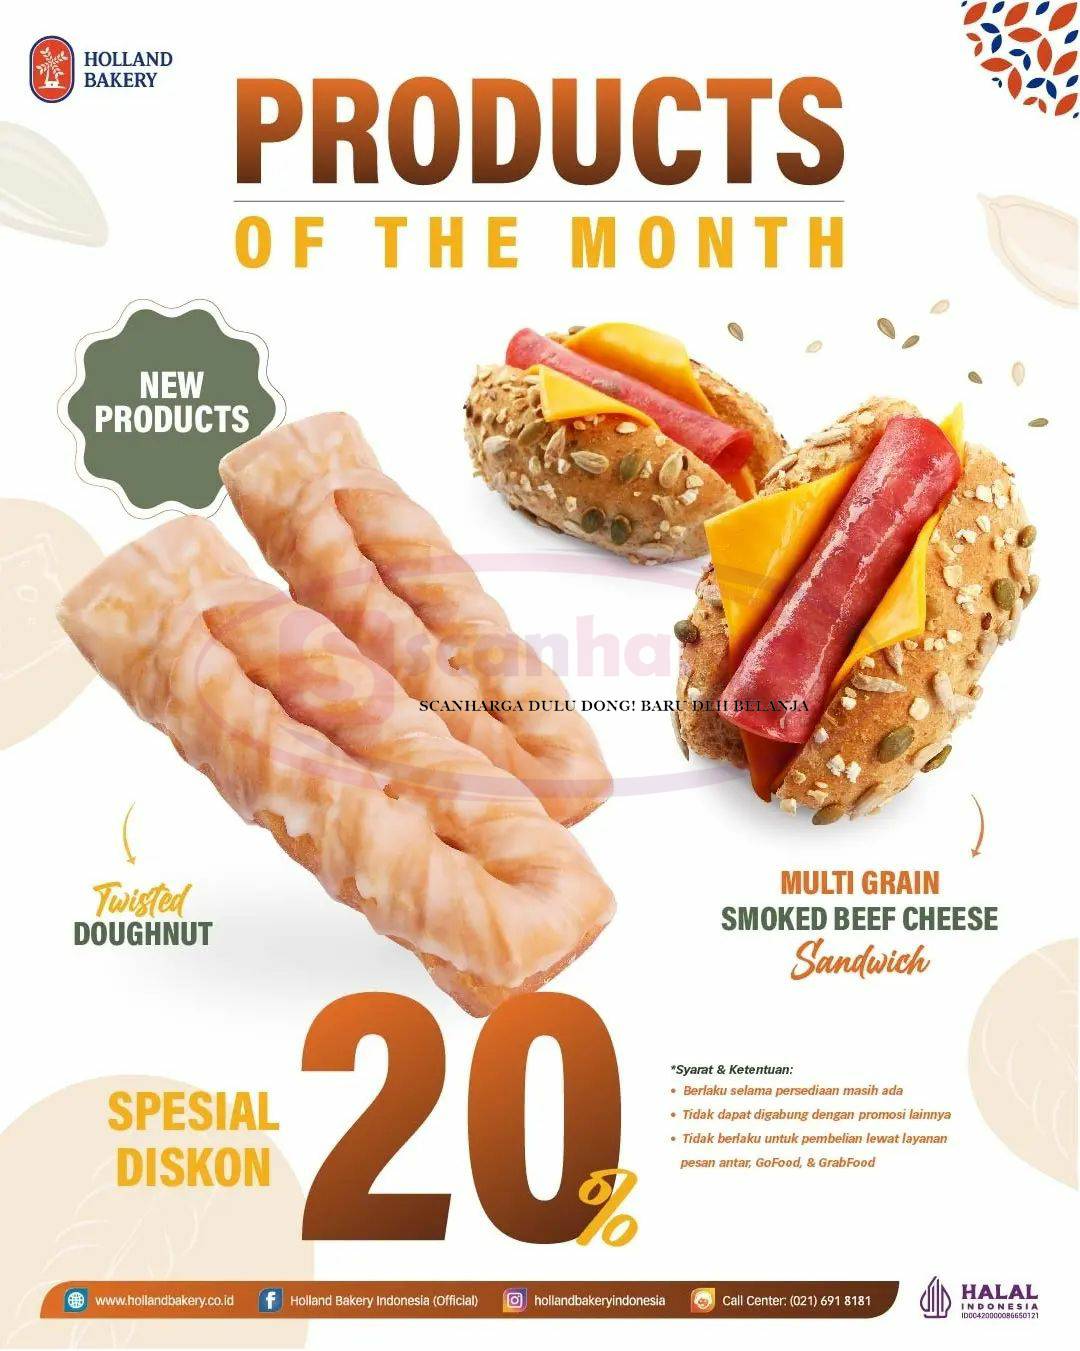 Promo Holland Bakery Products Of The Month Diskon 20%